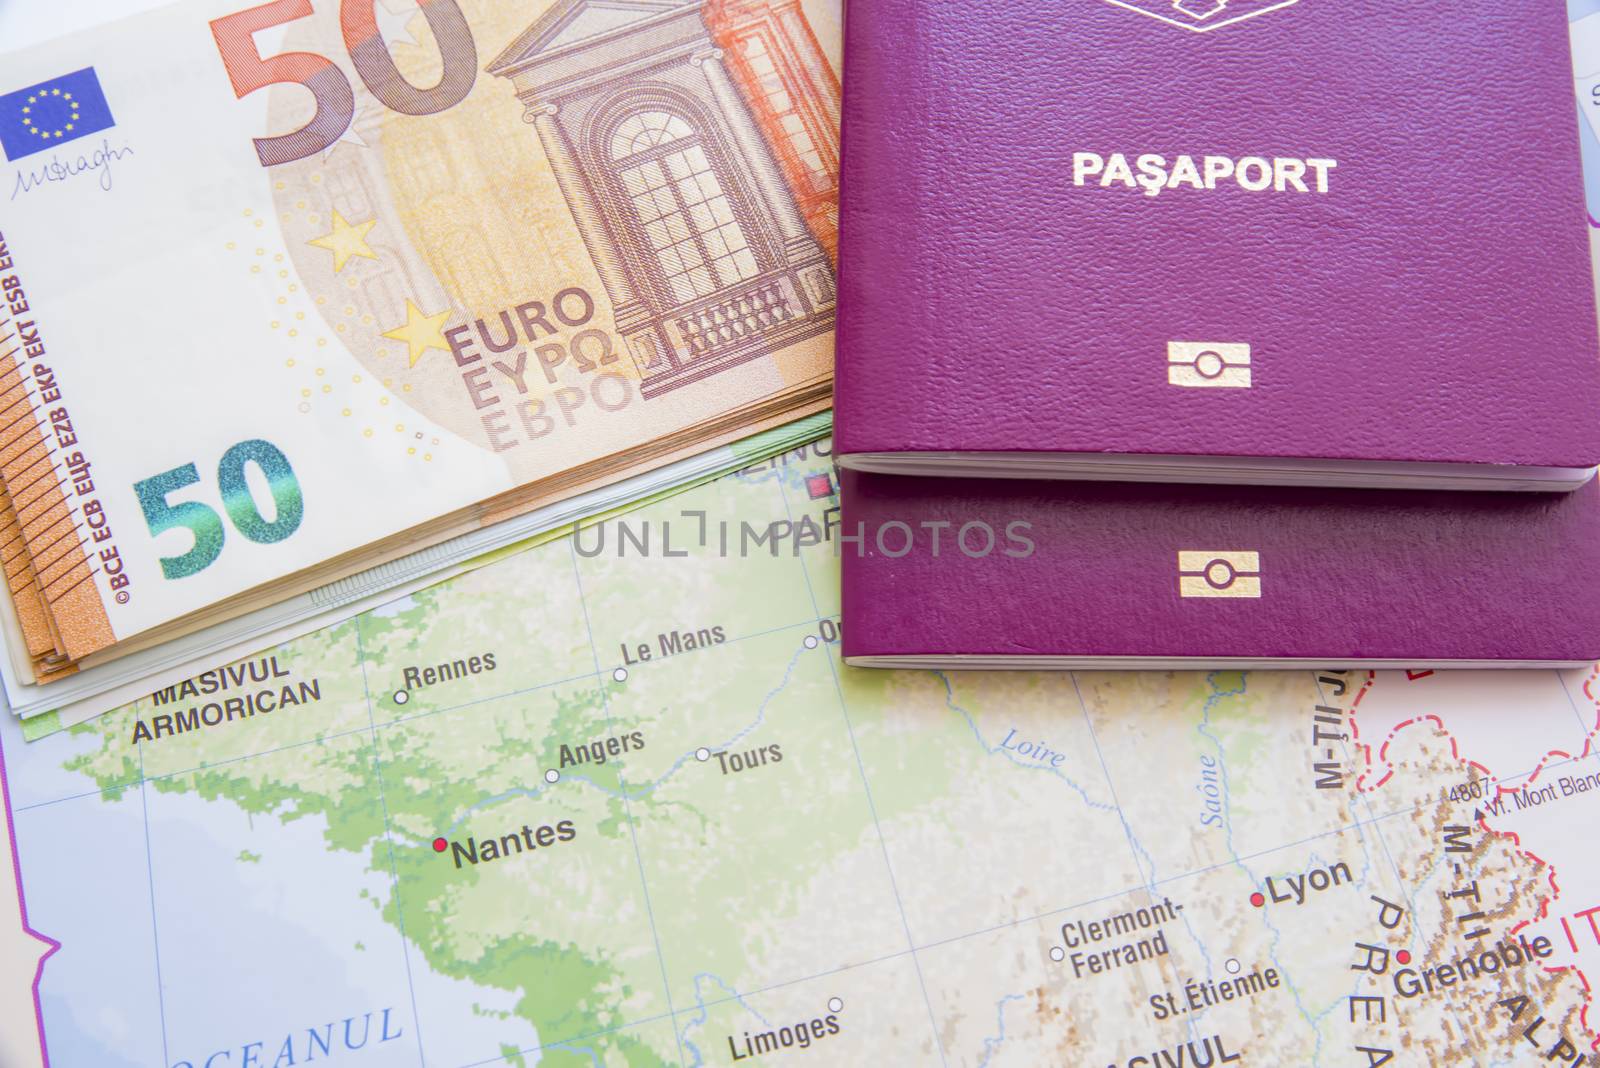 Euro banknotes and biometric passports over map.